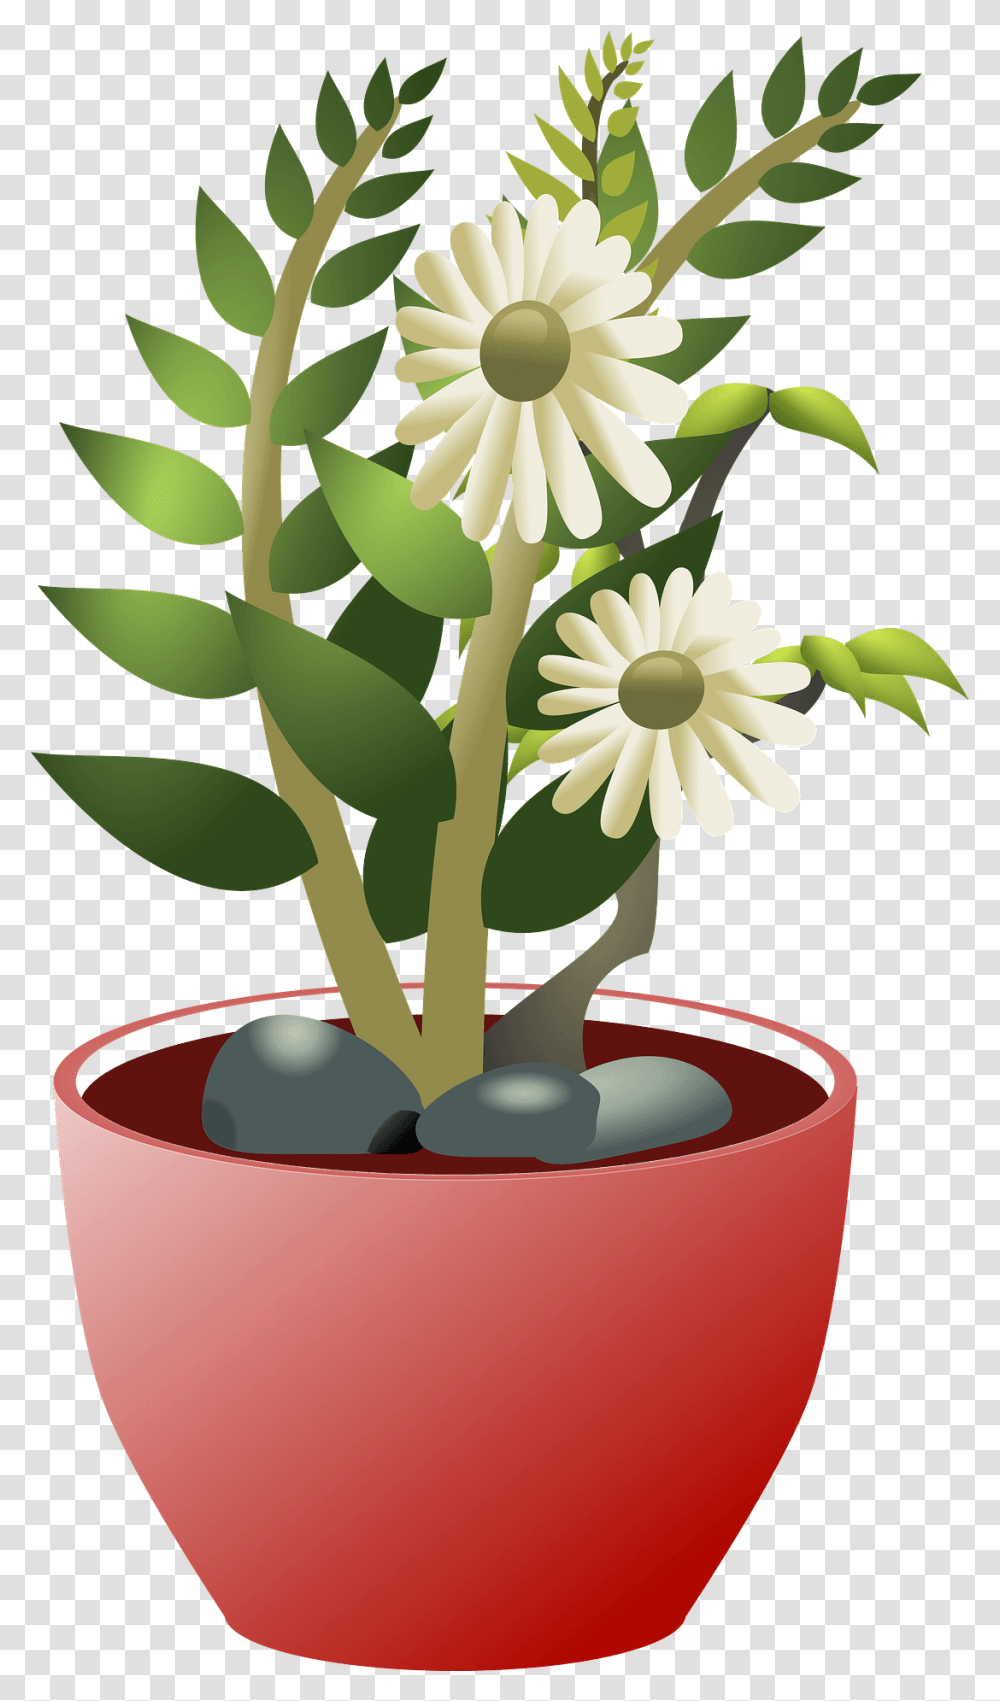 White Flowers In A Brown Pot Clipart Free Download Clip Art, Plant, Daisy, Daisies, Blossom Transparent Png